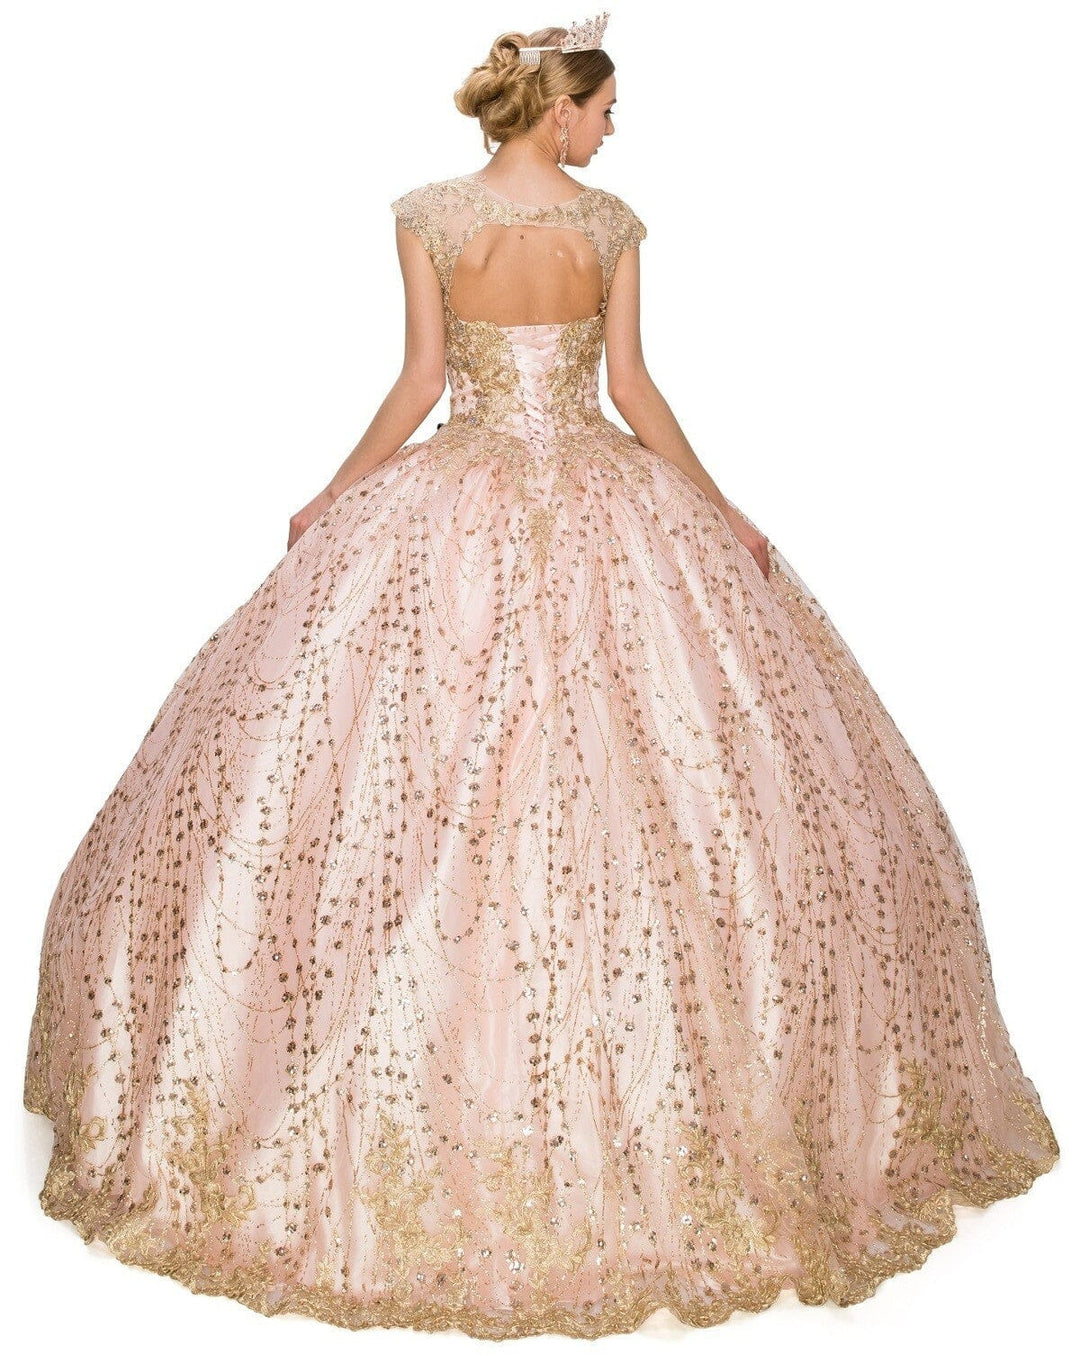 Applique Glitter Ball Gown by Cinderella Couture 8024J